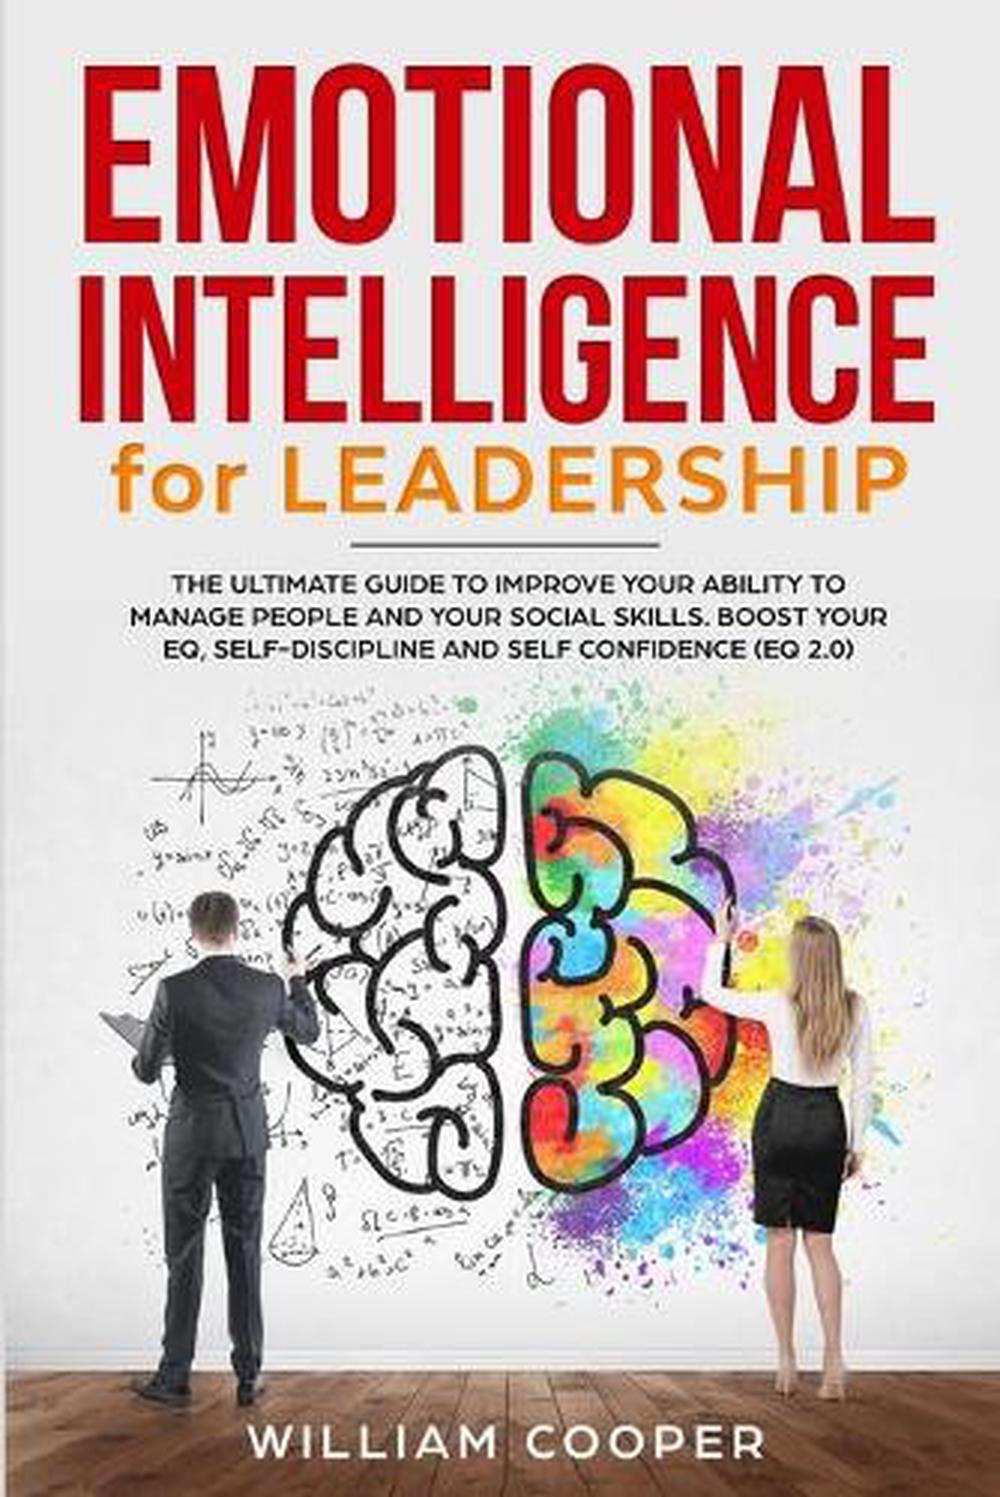 thesis on emotional intelligence and leadership